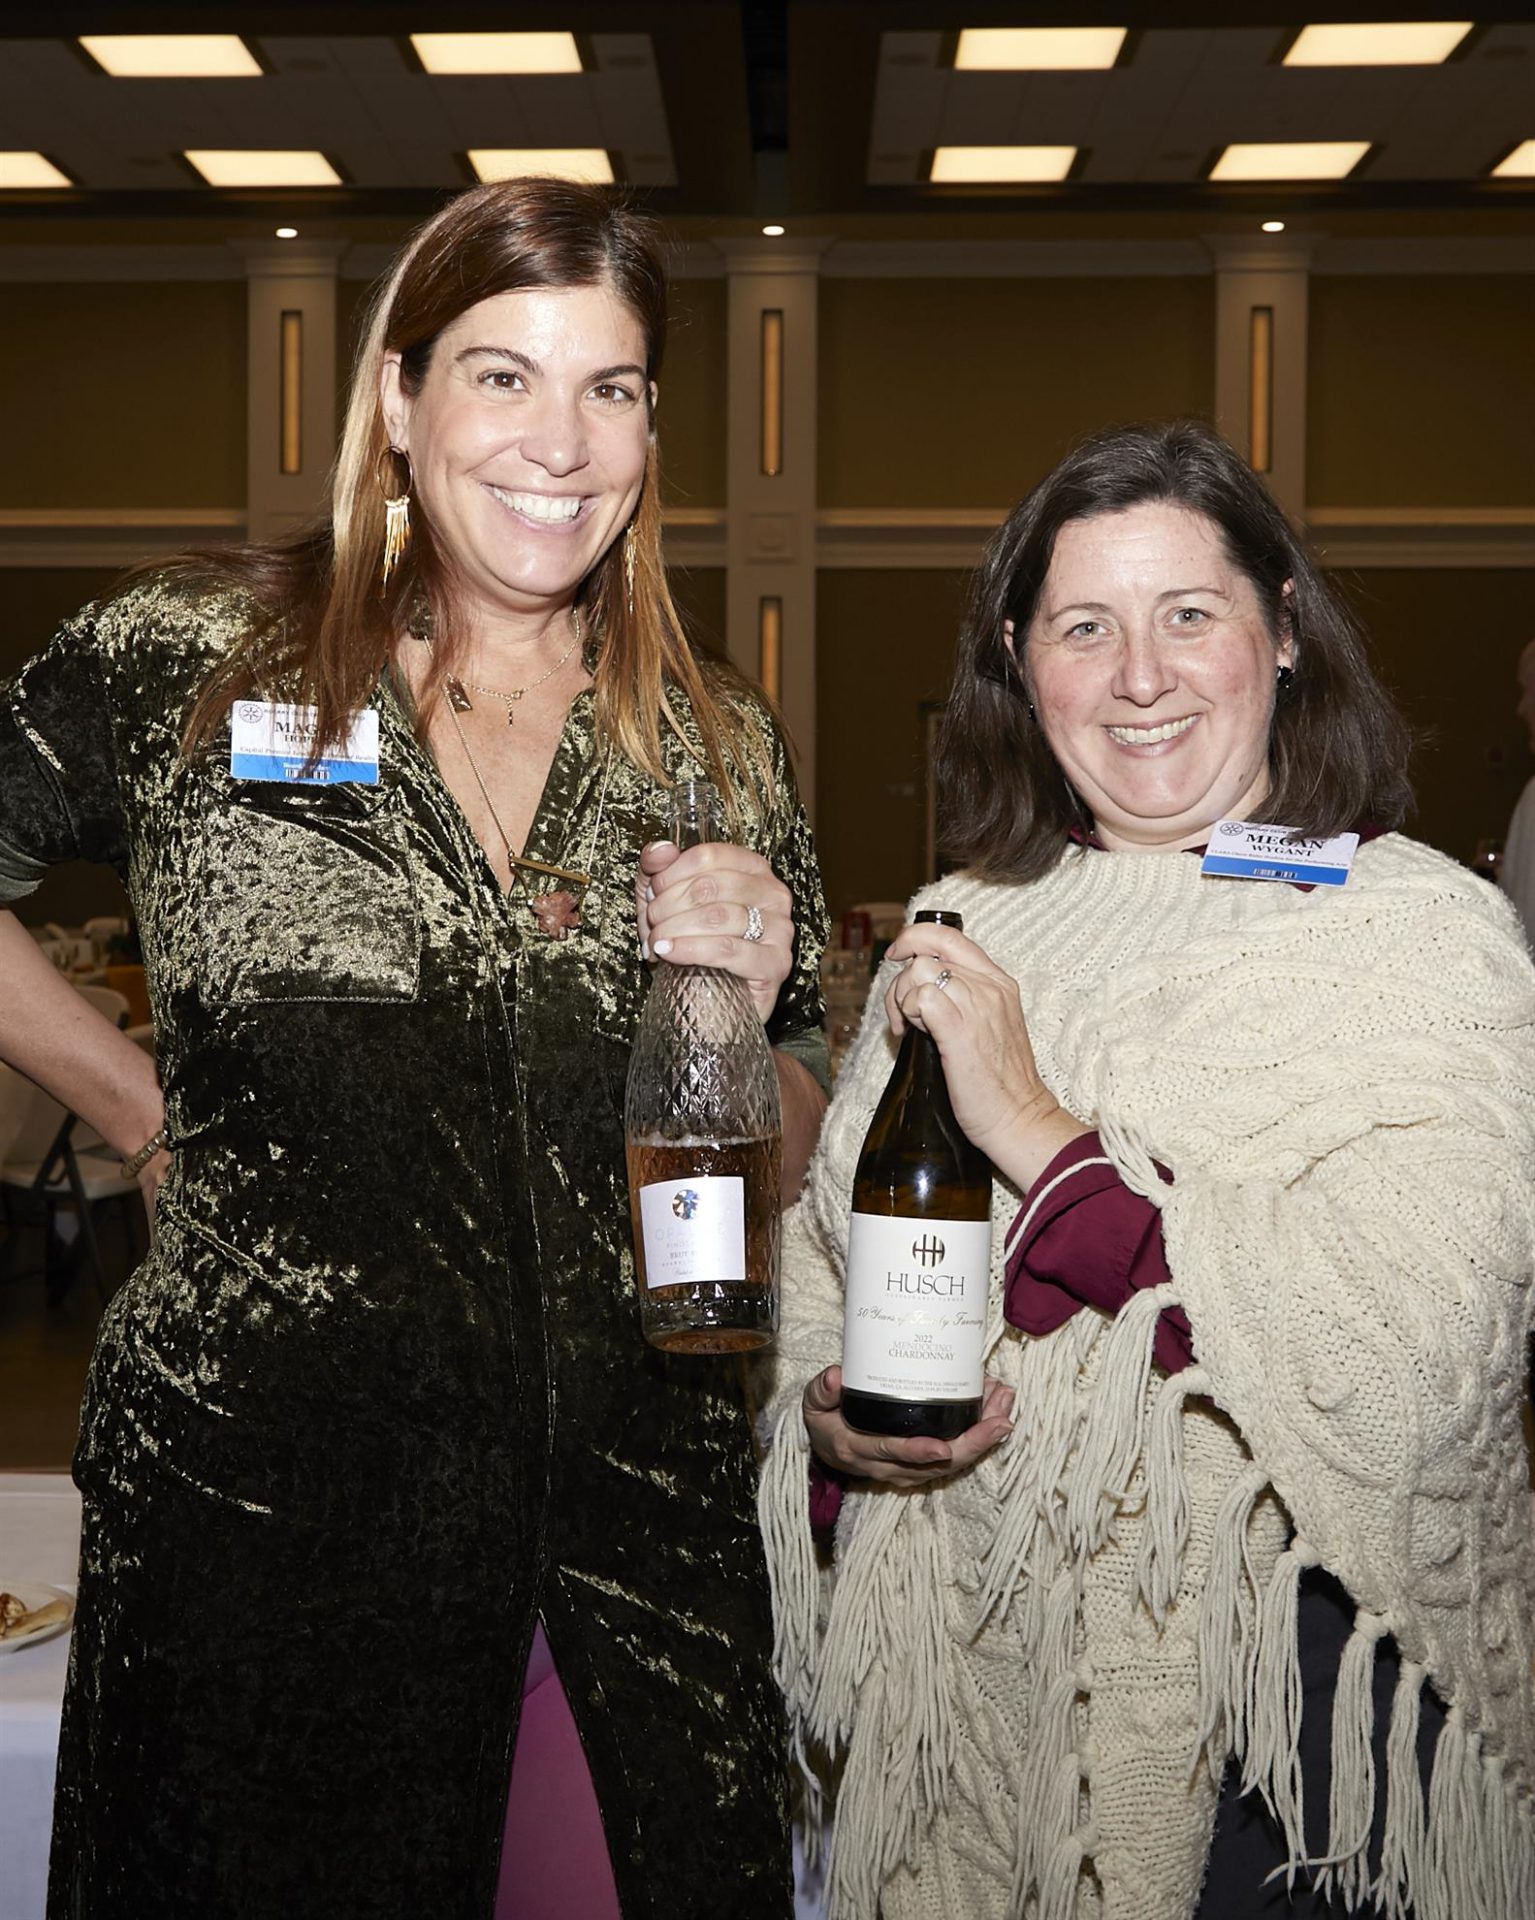 Two women posing with bottles of chardonnay